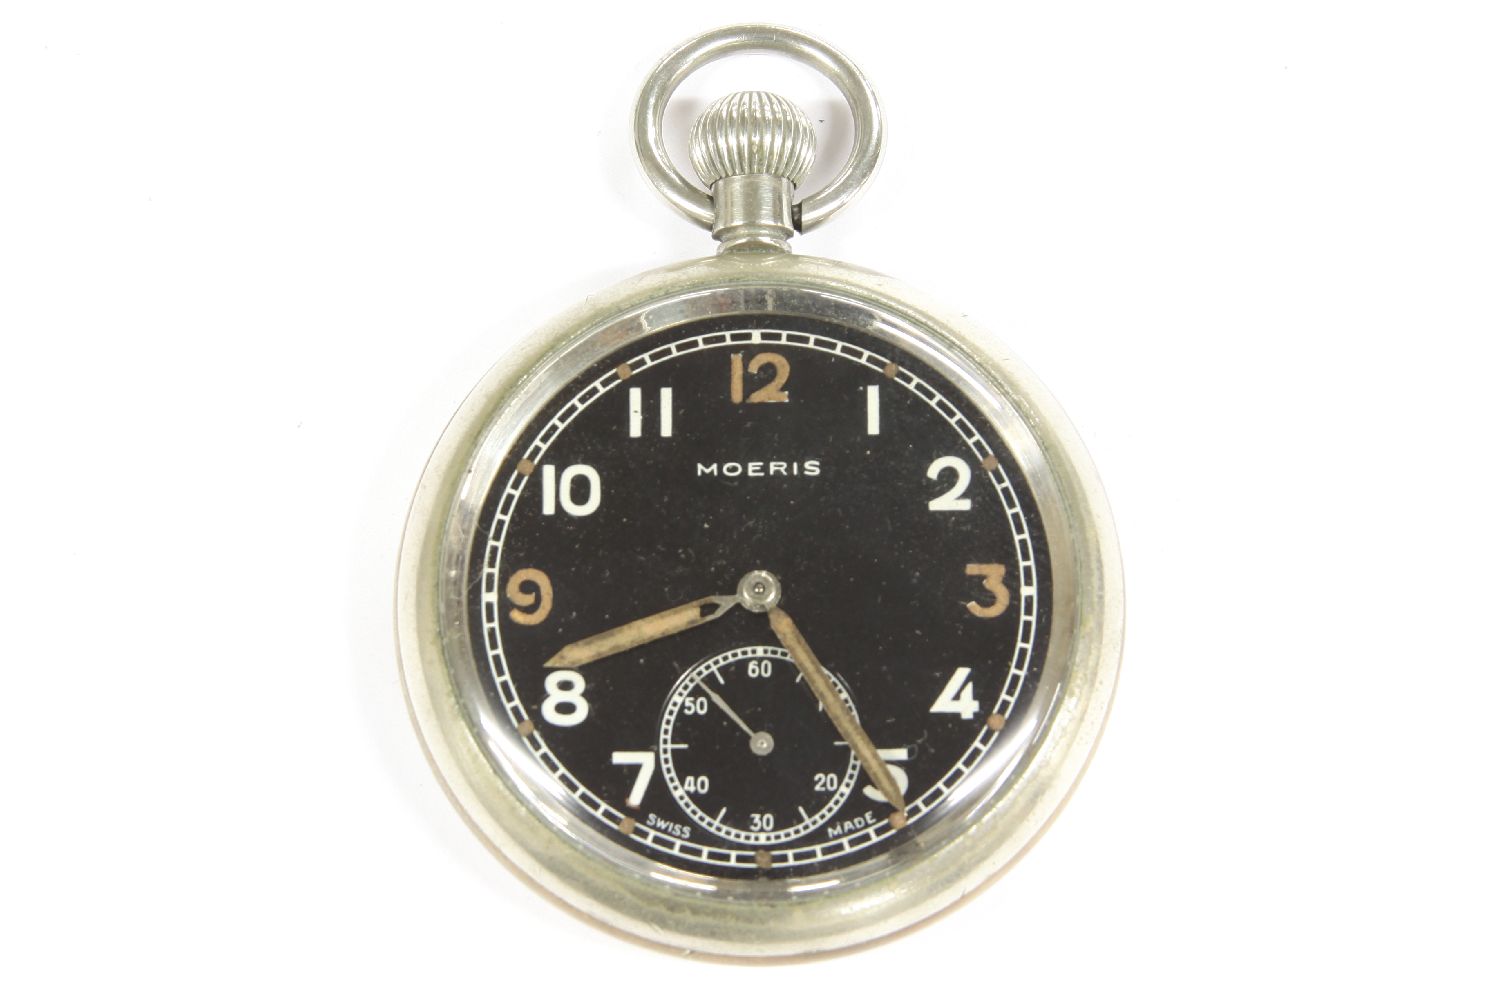 A Moeris military issue pocket watch, the back engraved with the Broad Arrow 'Crows Foot' mark